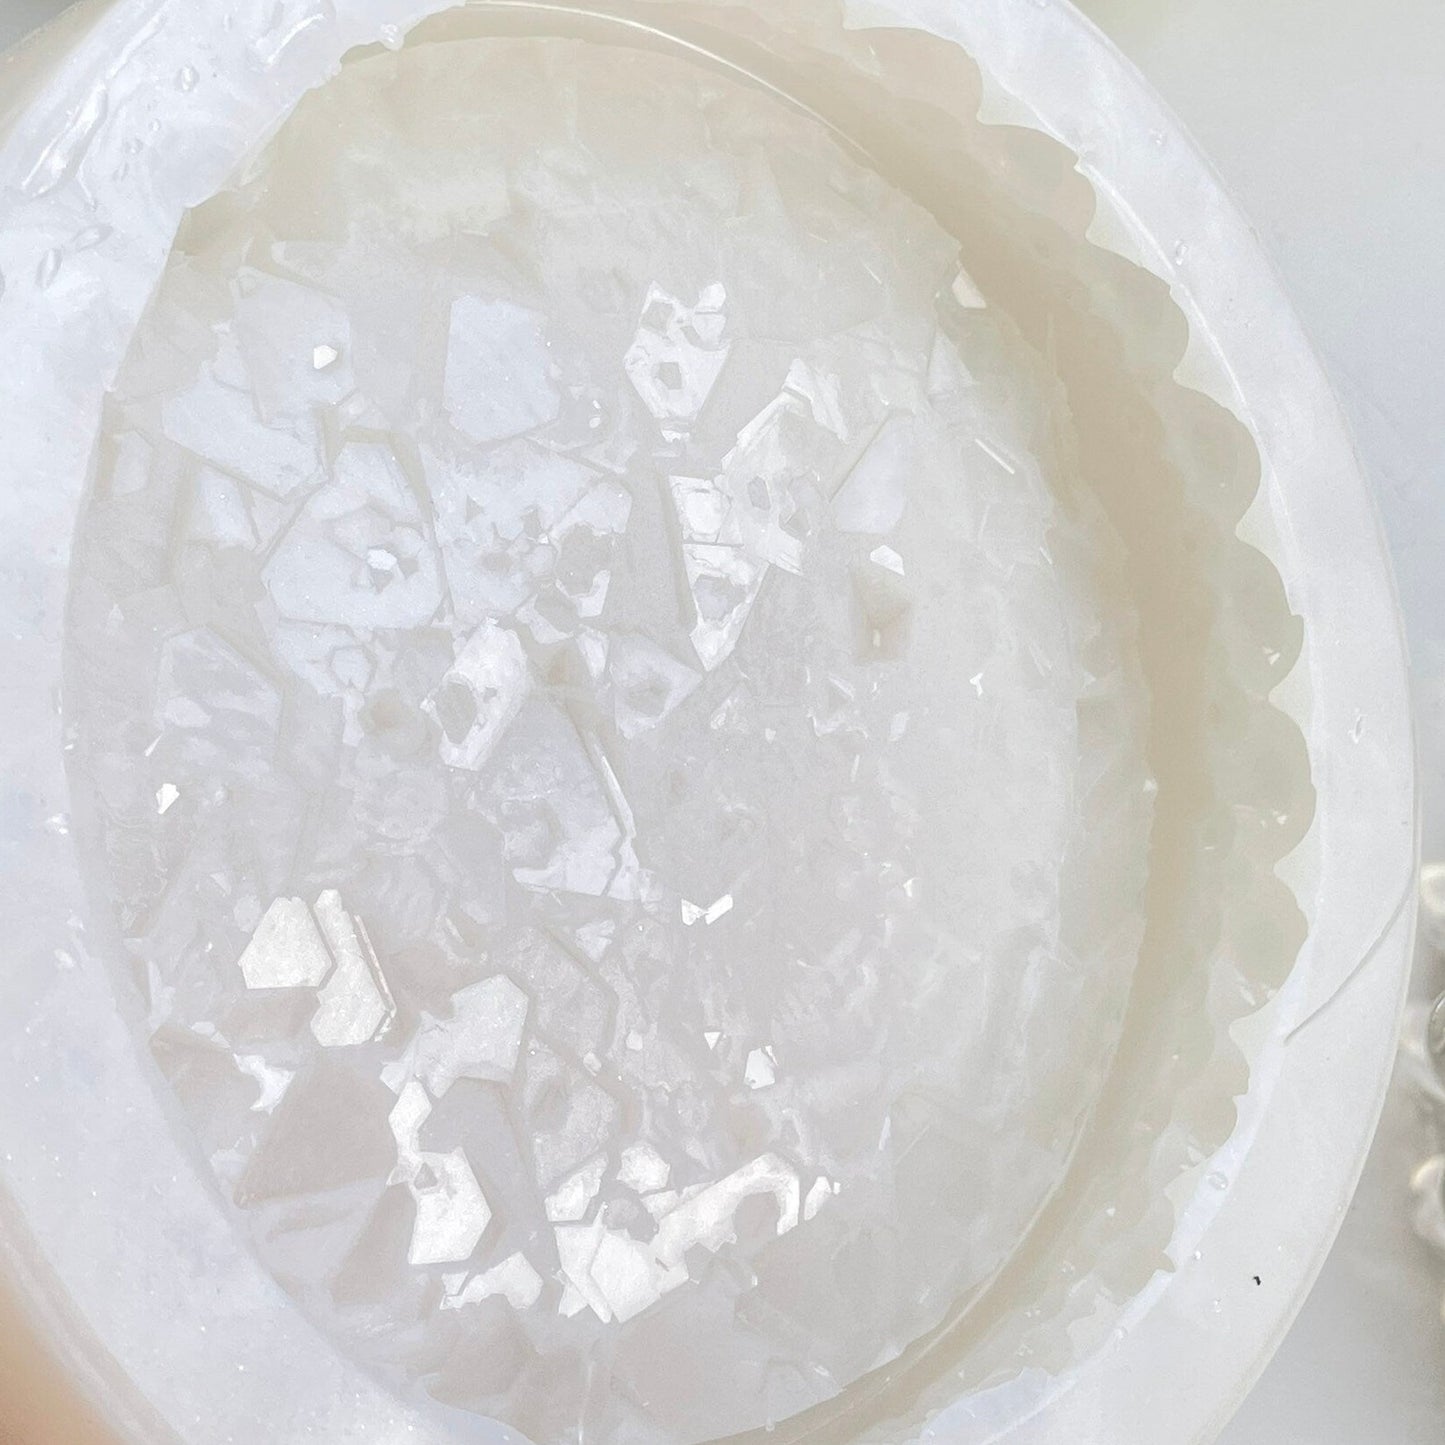 Luxury Crystal Bubble Plate Silicone Mold: Round Geode Resin Tray